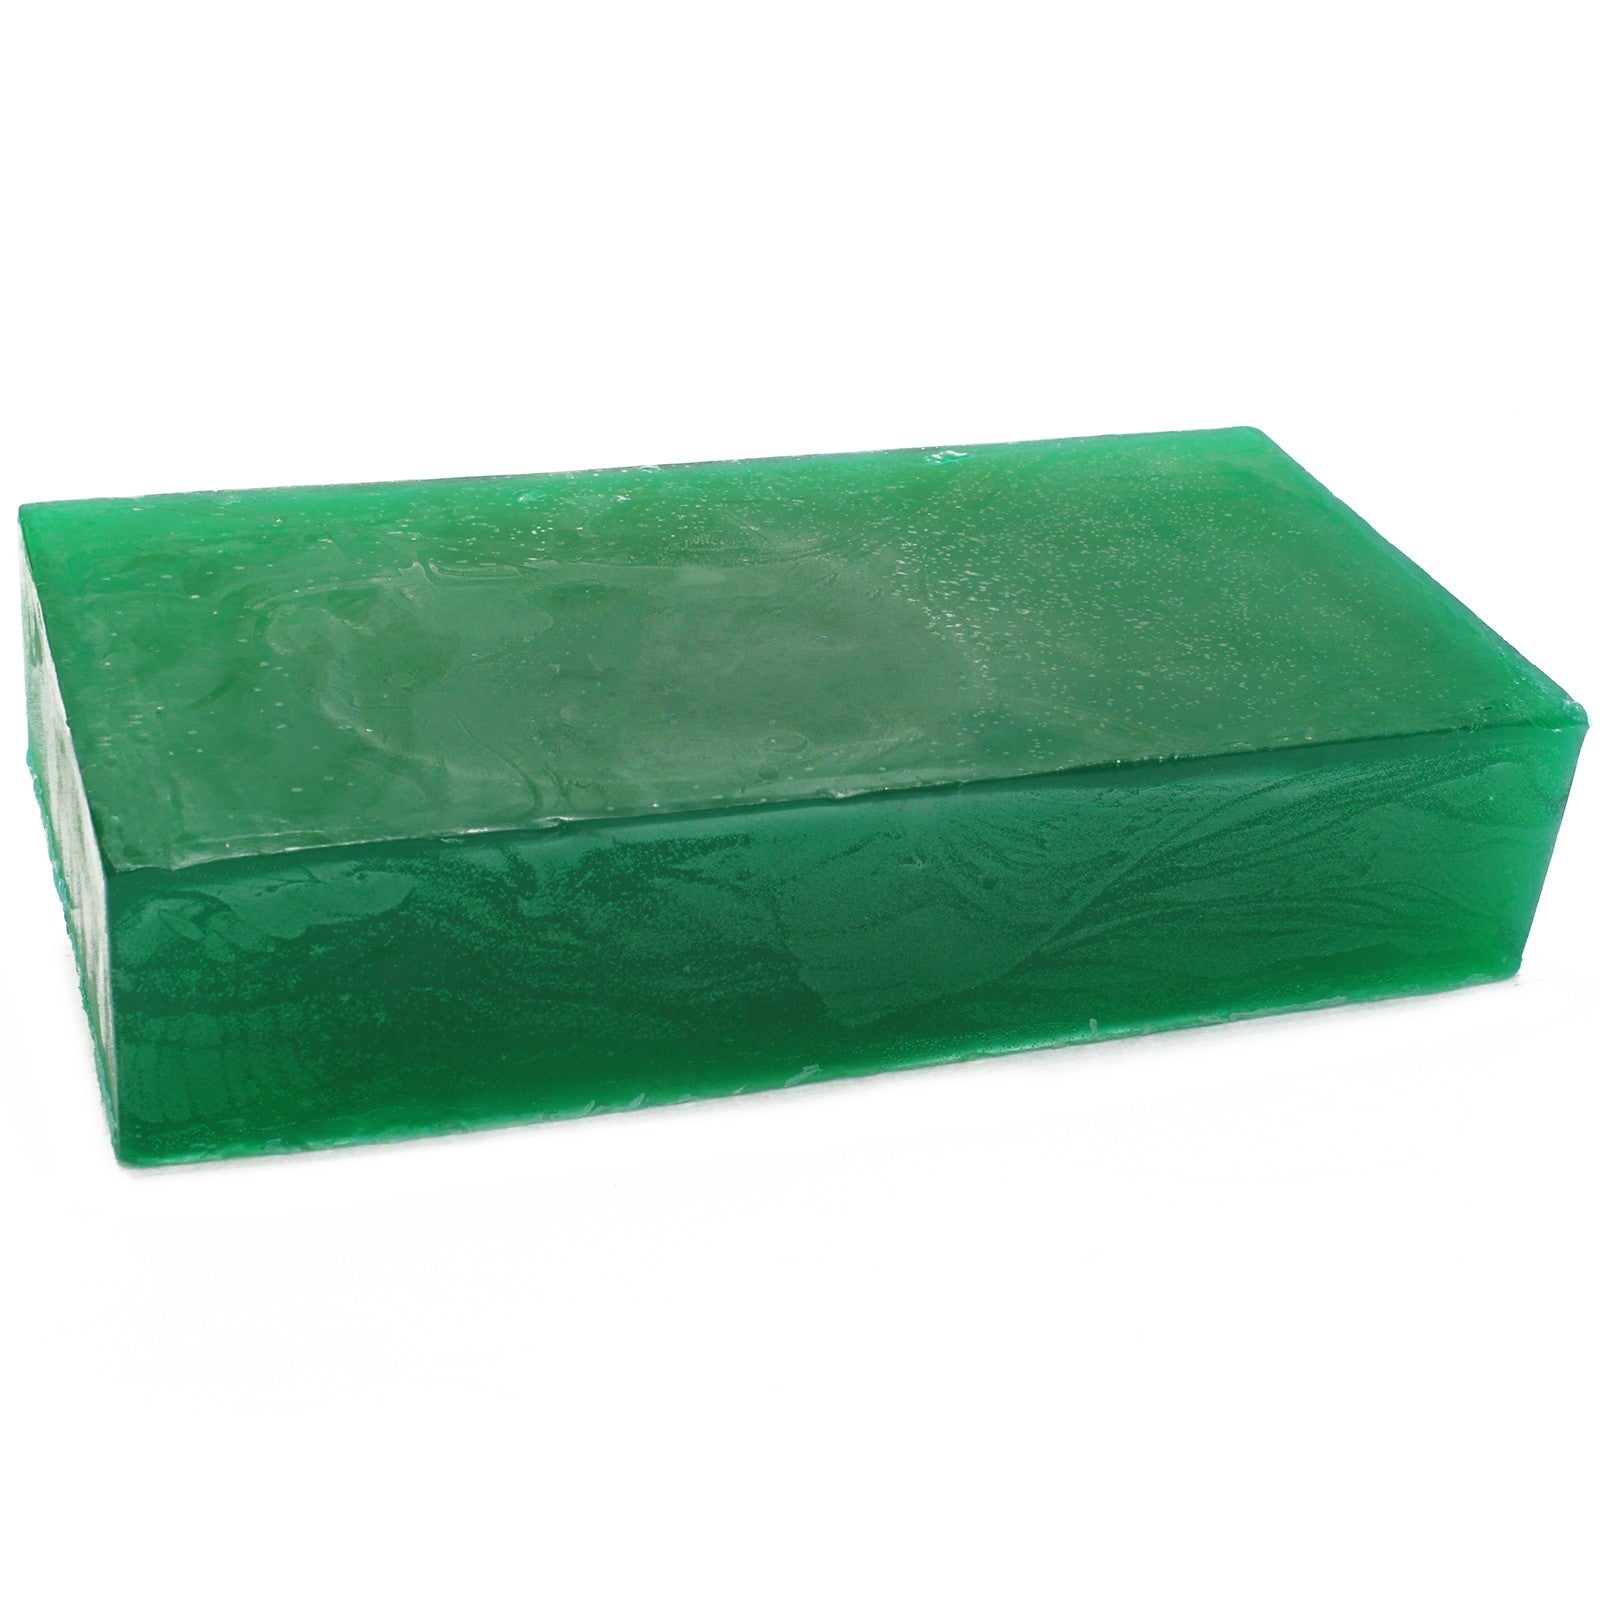 Peppermint Essential Oil Soap Loaf - 2kg - £45.0 - 